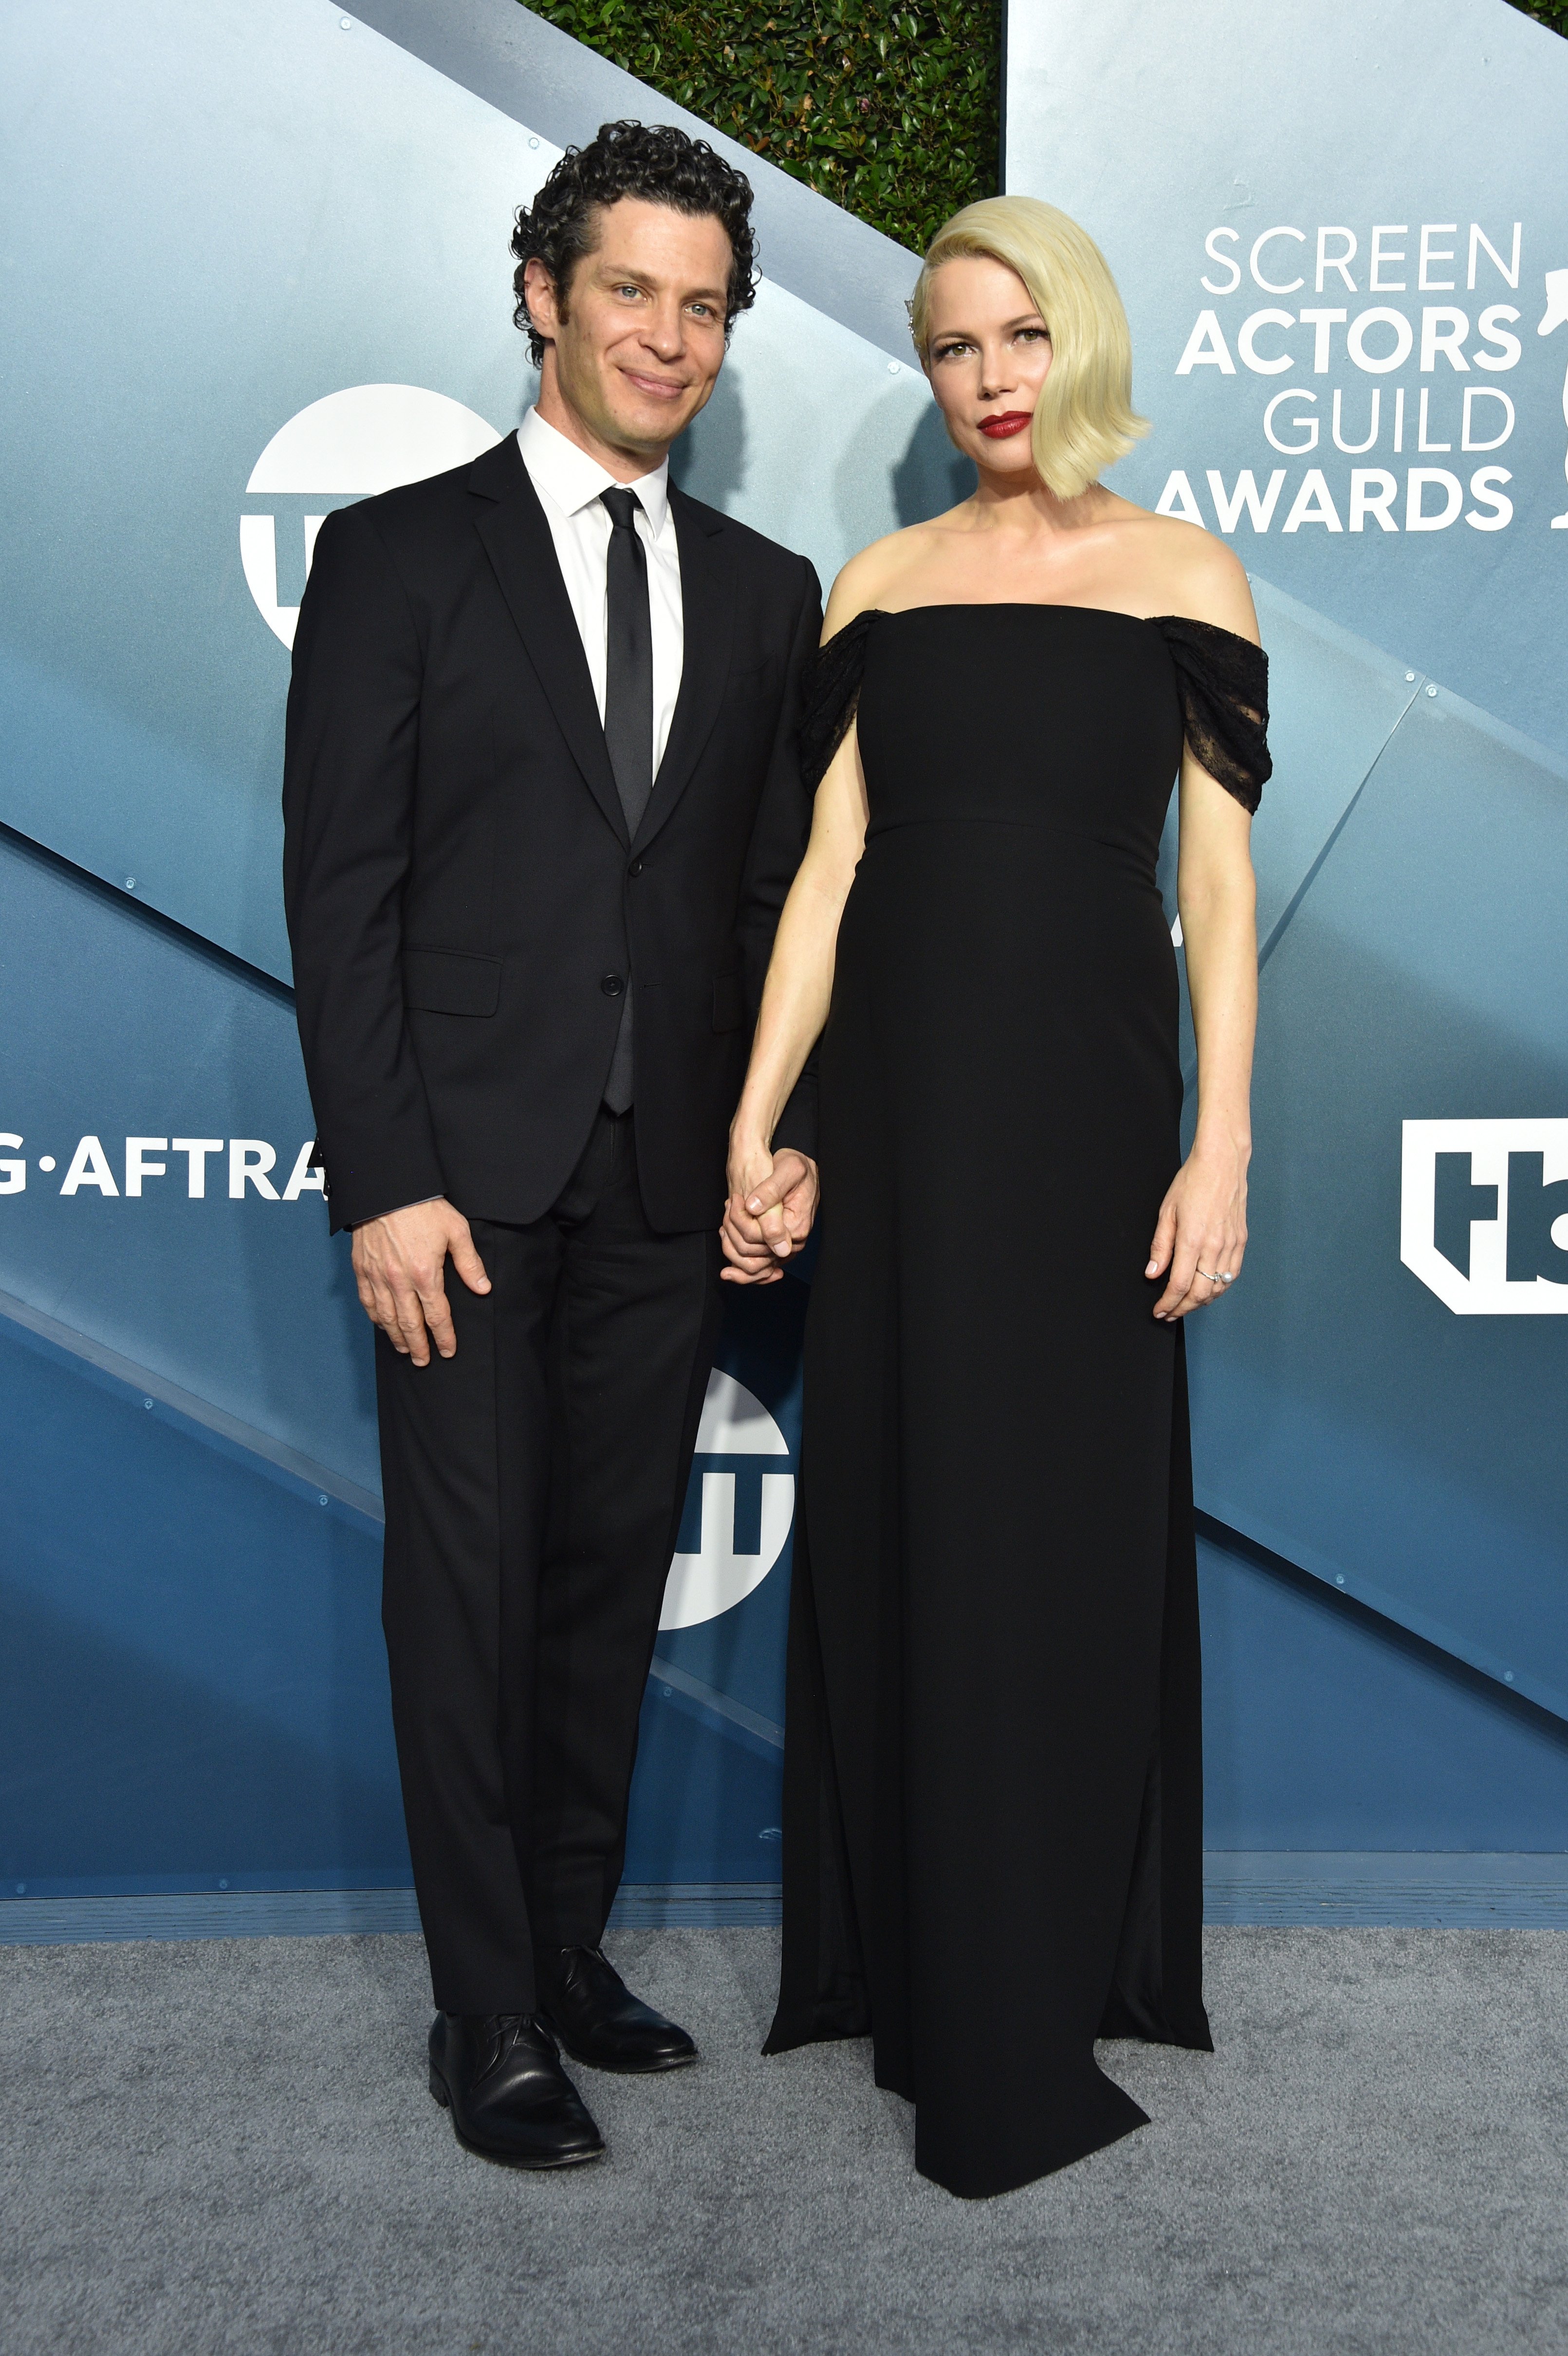 Thomas Kail and Michelle Williams at the 26th Annual Screen Actors Guild Awards, 2020, Los Angeles, California. | Photo: Getty Images